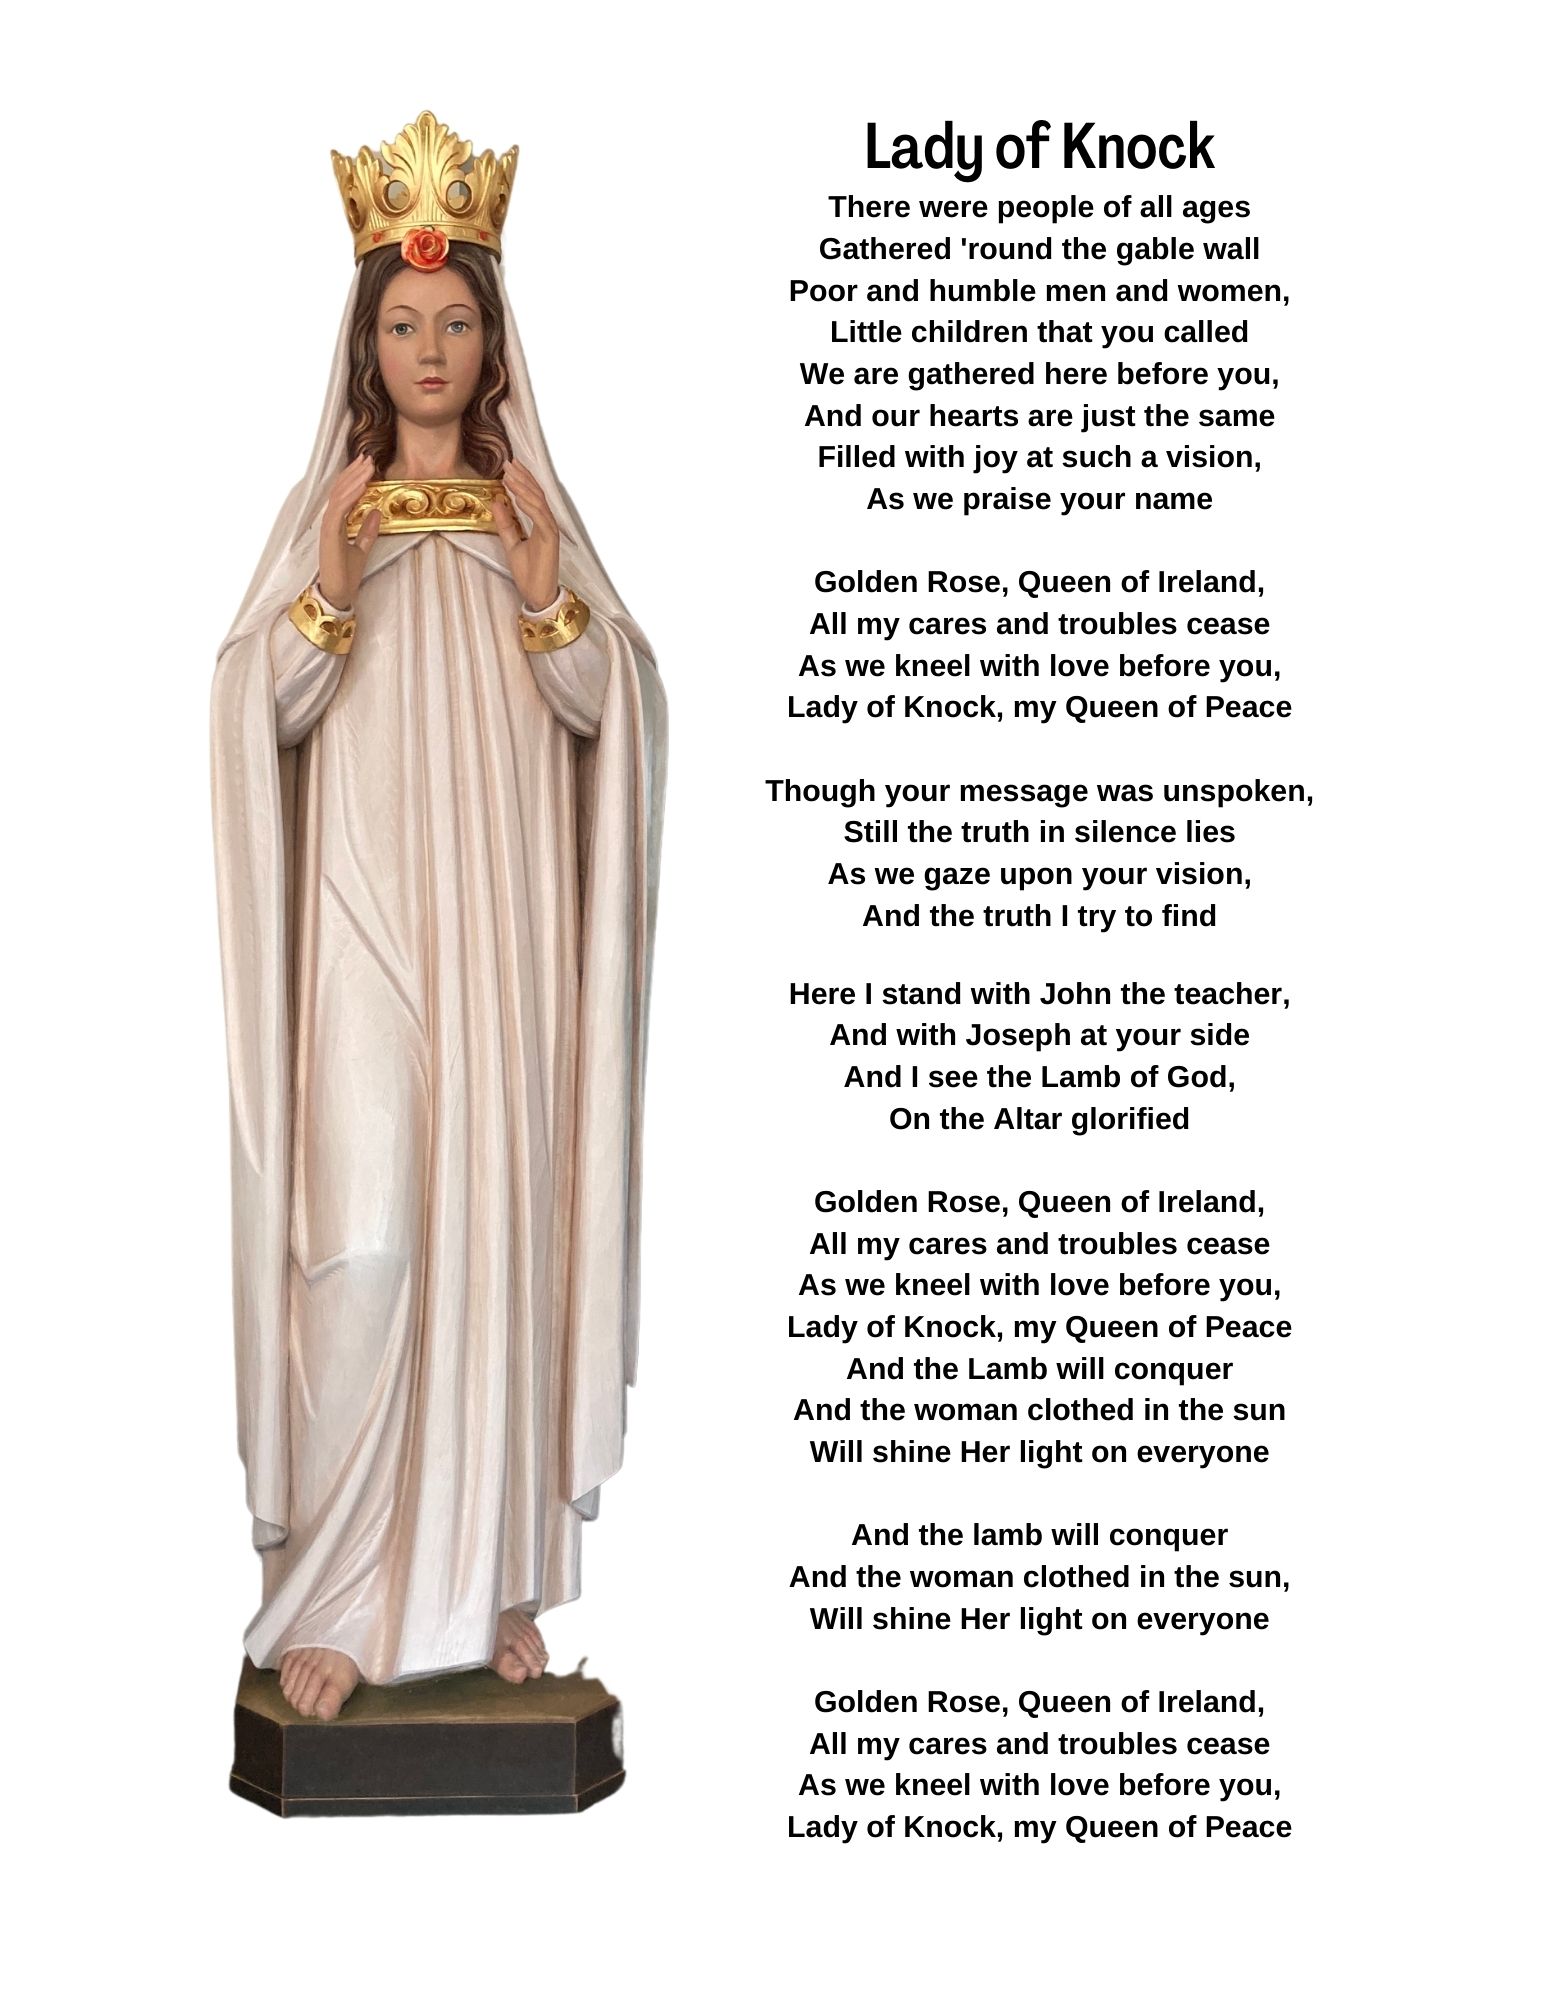 Lady of Knock Hymn with wooden statue